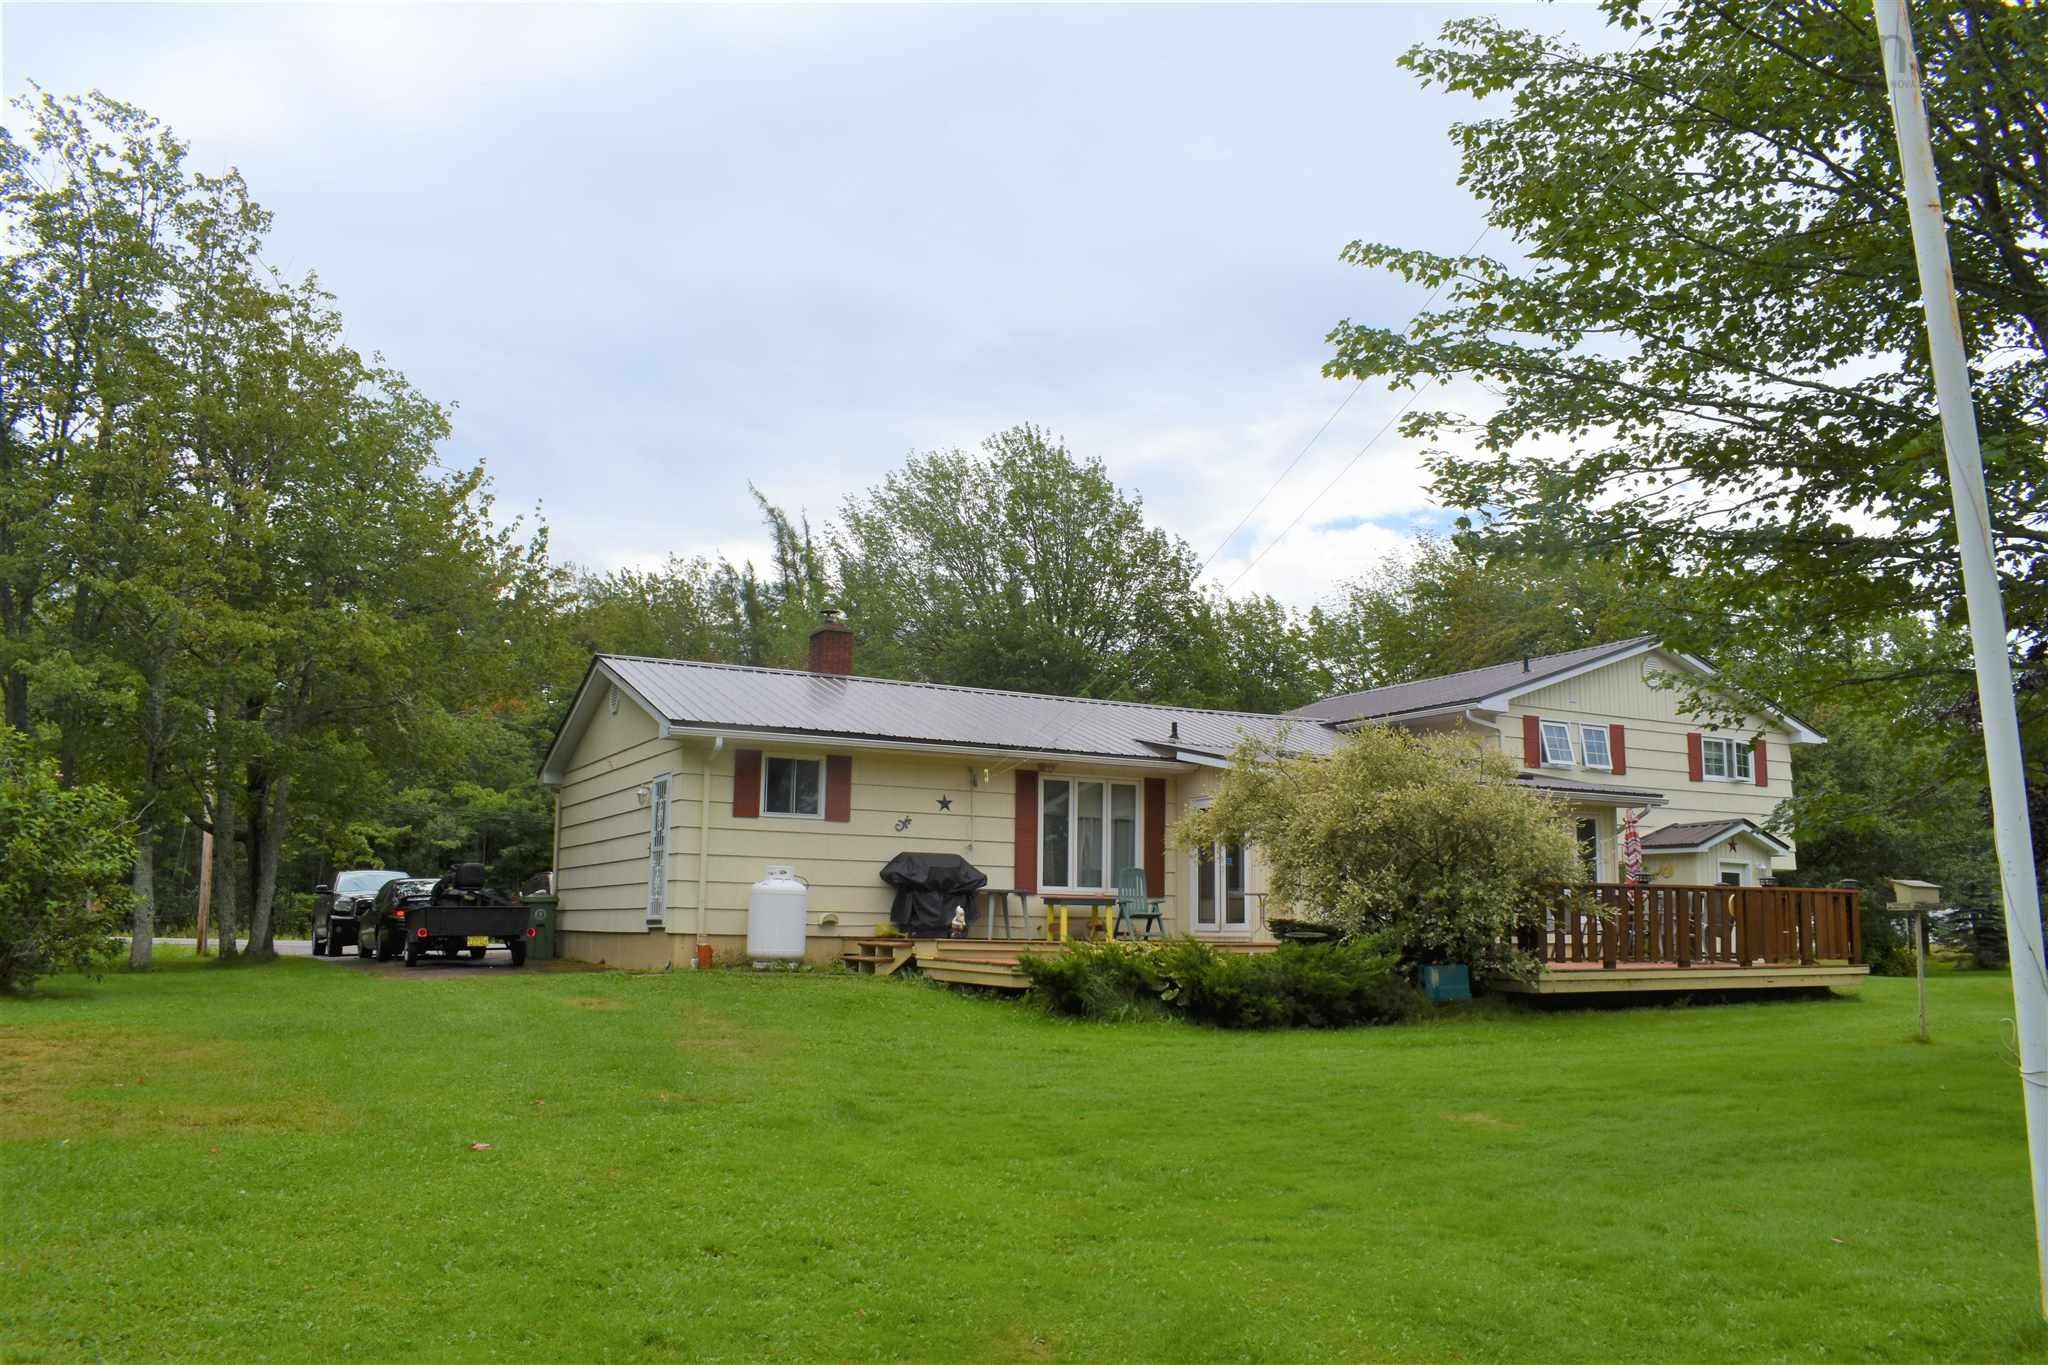 Main Photo: 1285 Southampton Road in West Amherst: 101-Amherst,Brookdale,Warren Residential for sale (Northern Region)  : MLS®# 202121649